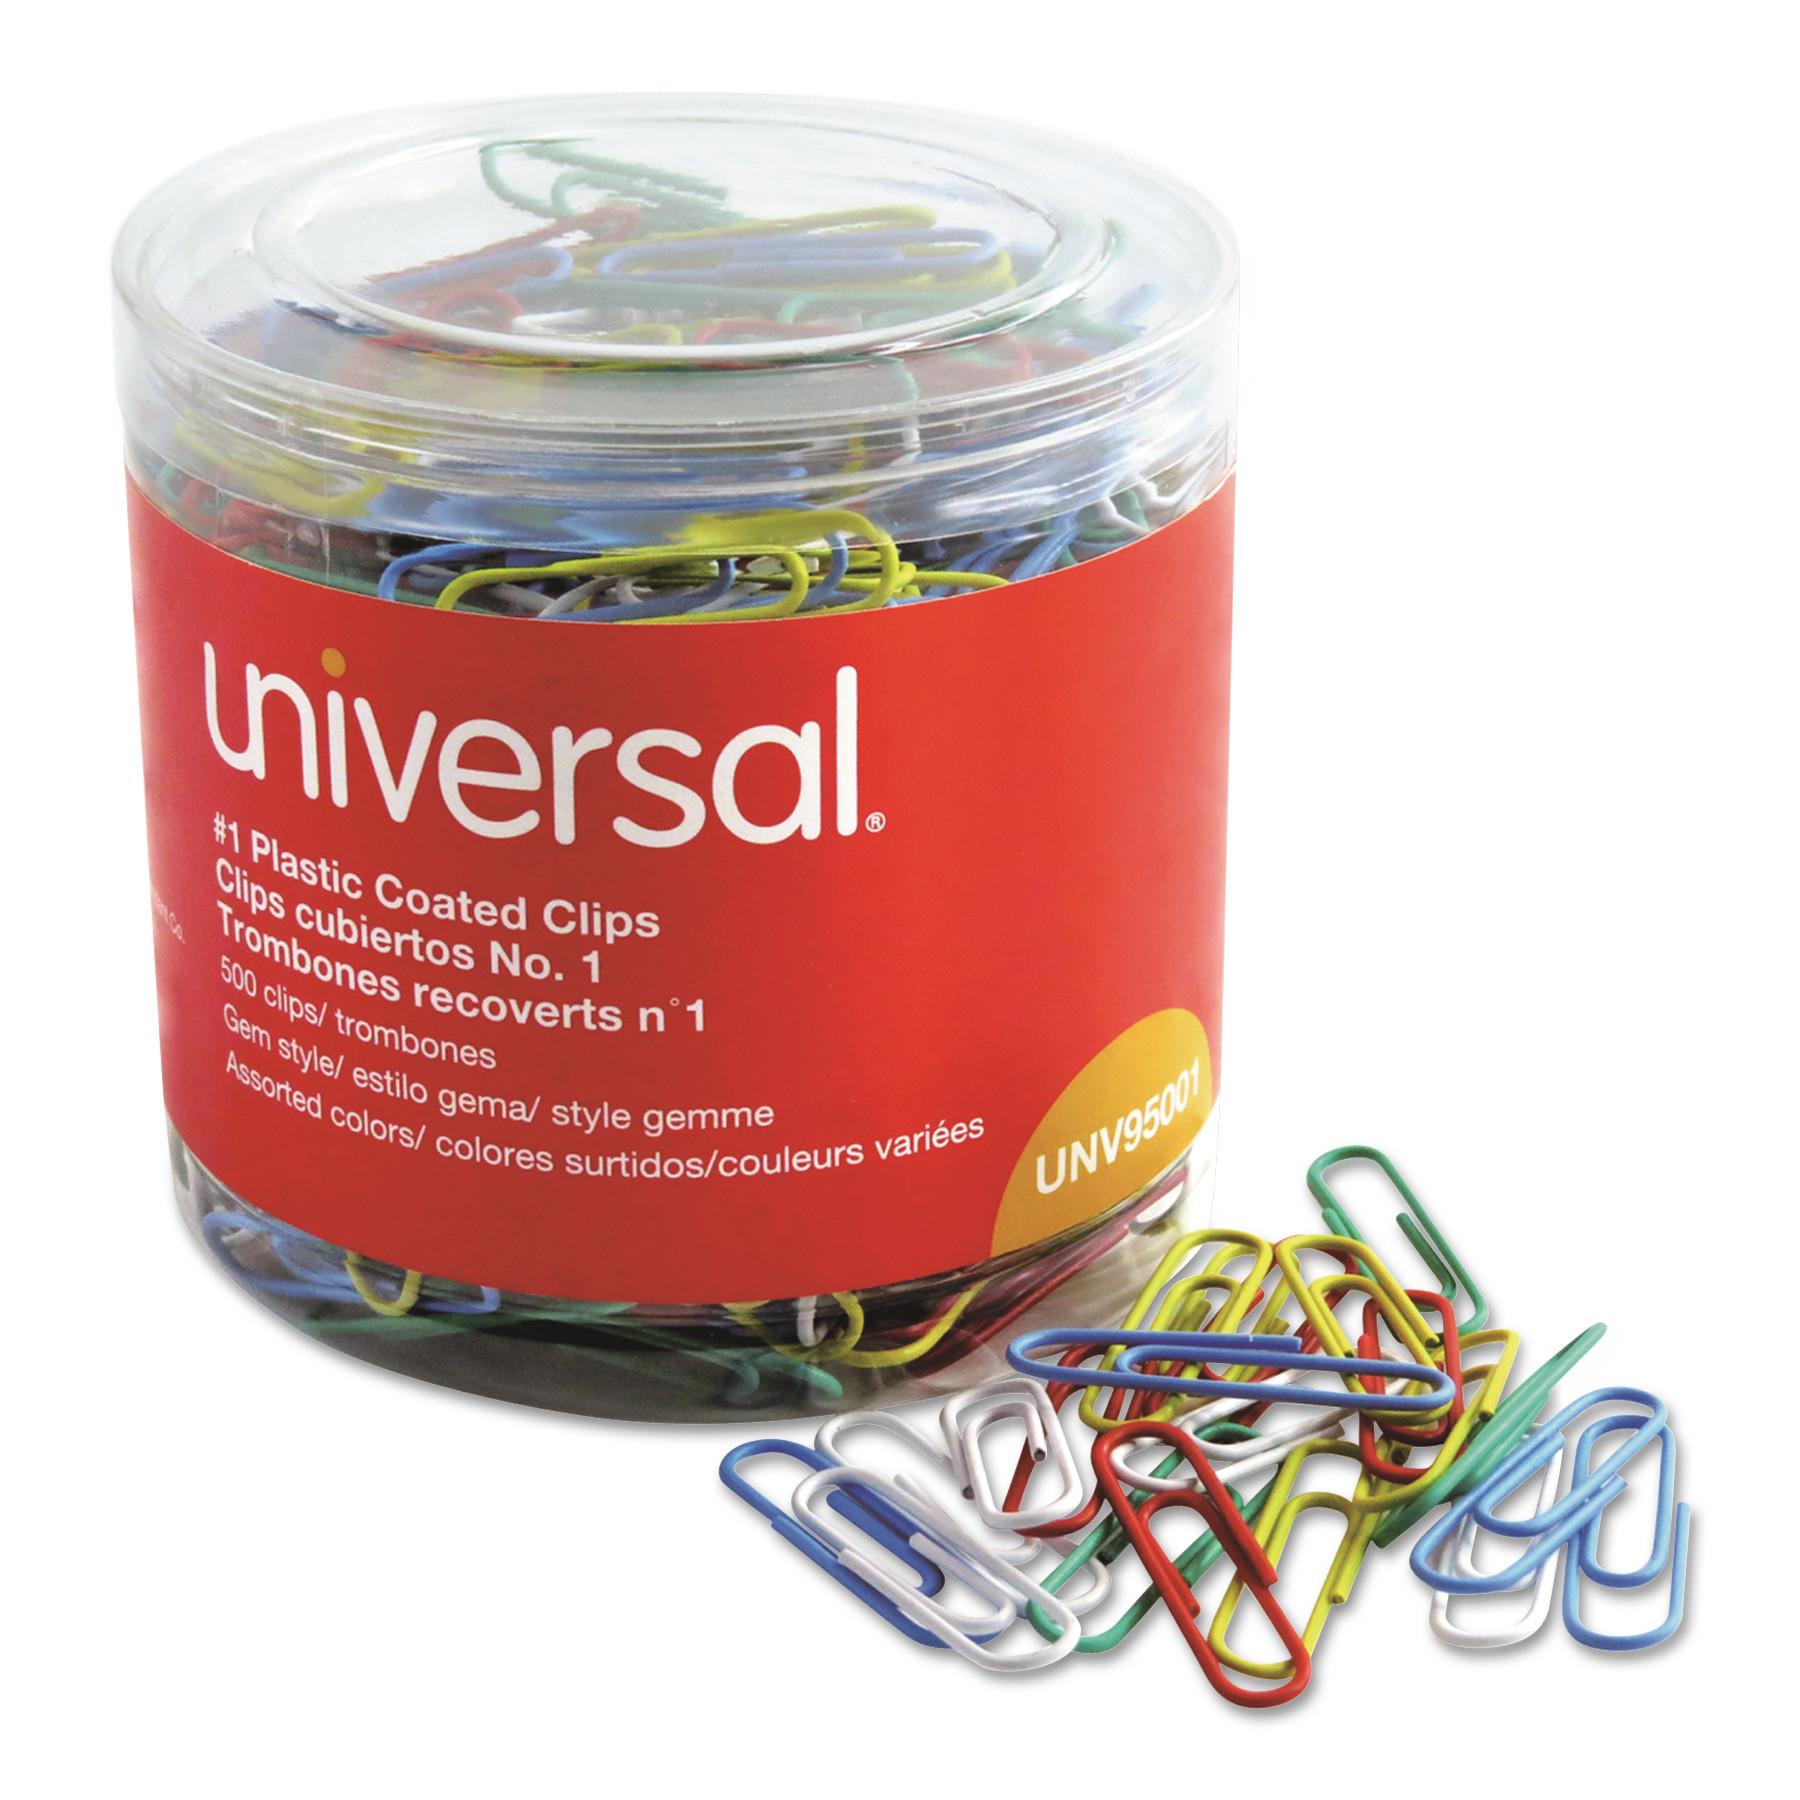  Universal UNV95001 Plastic-Coated Paper Clips, Small (No. 1), Assorted Colors, 500/Pack (UNV95001) 